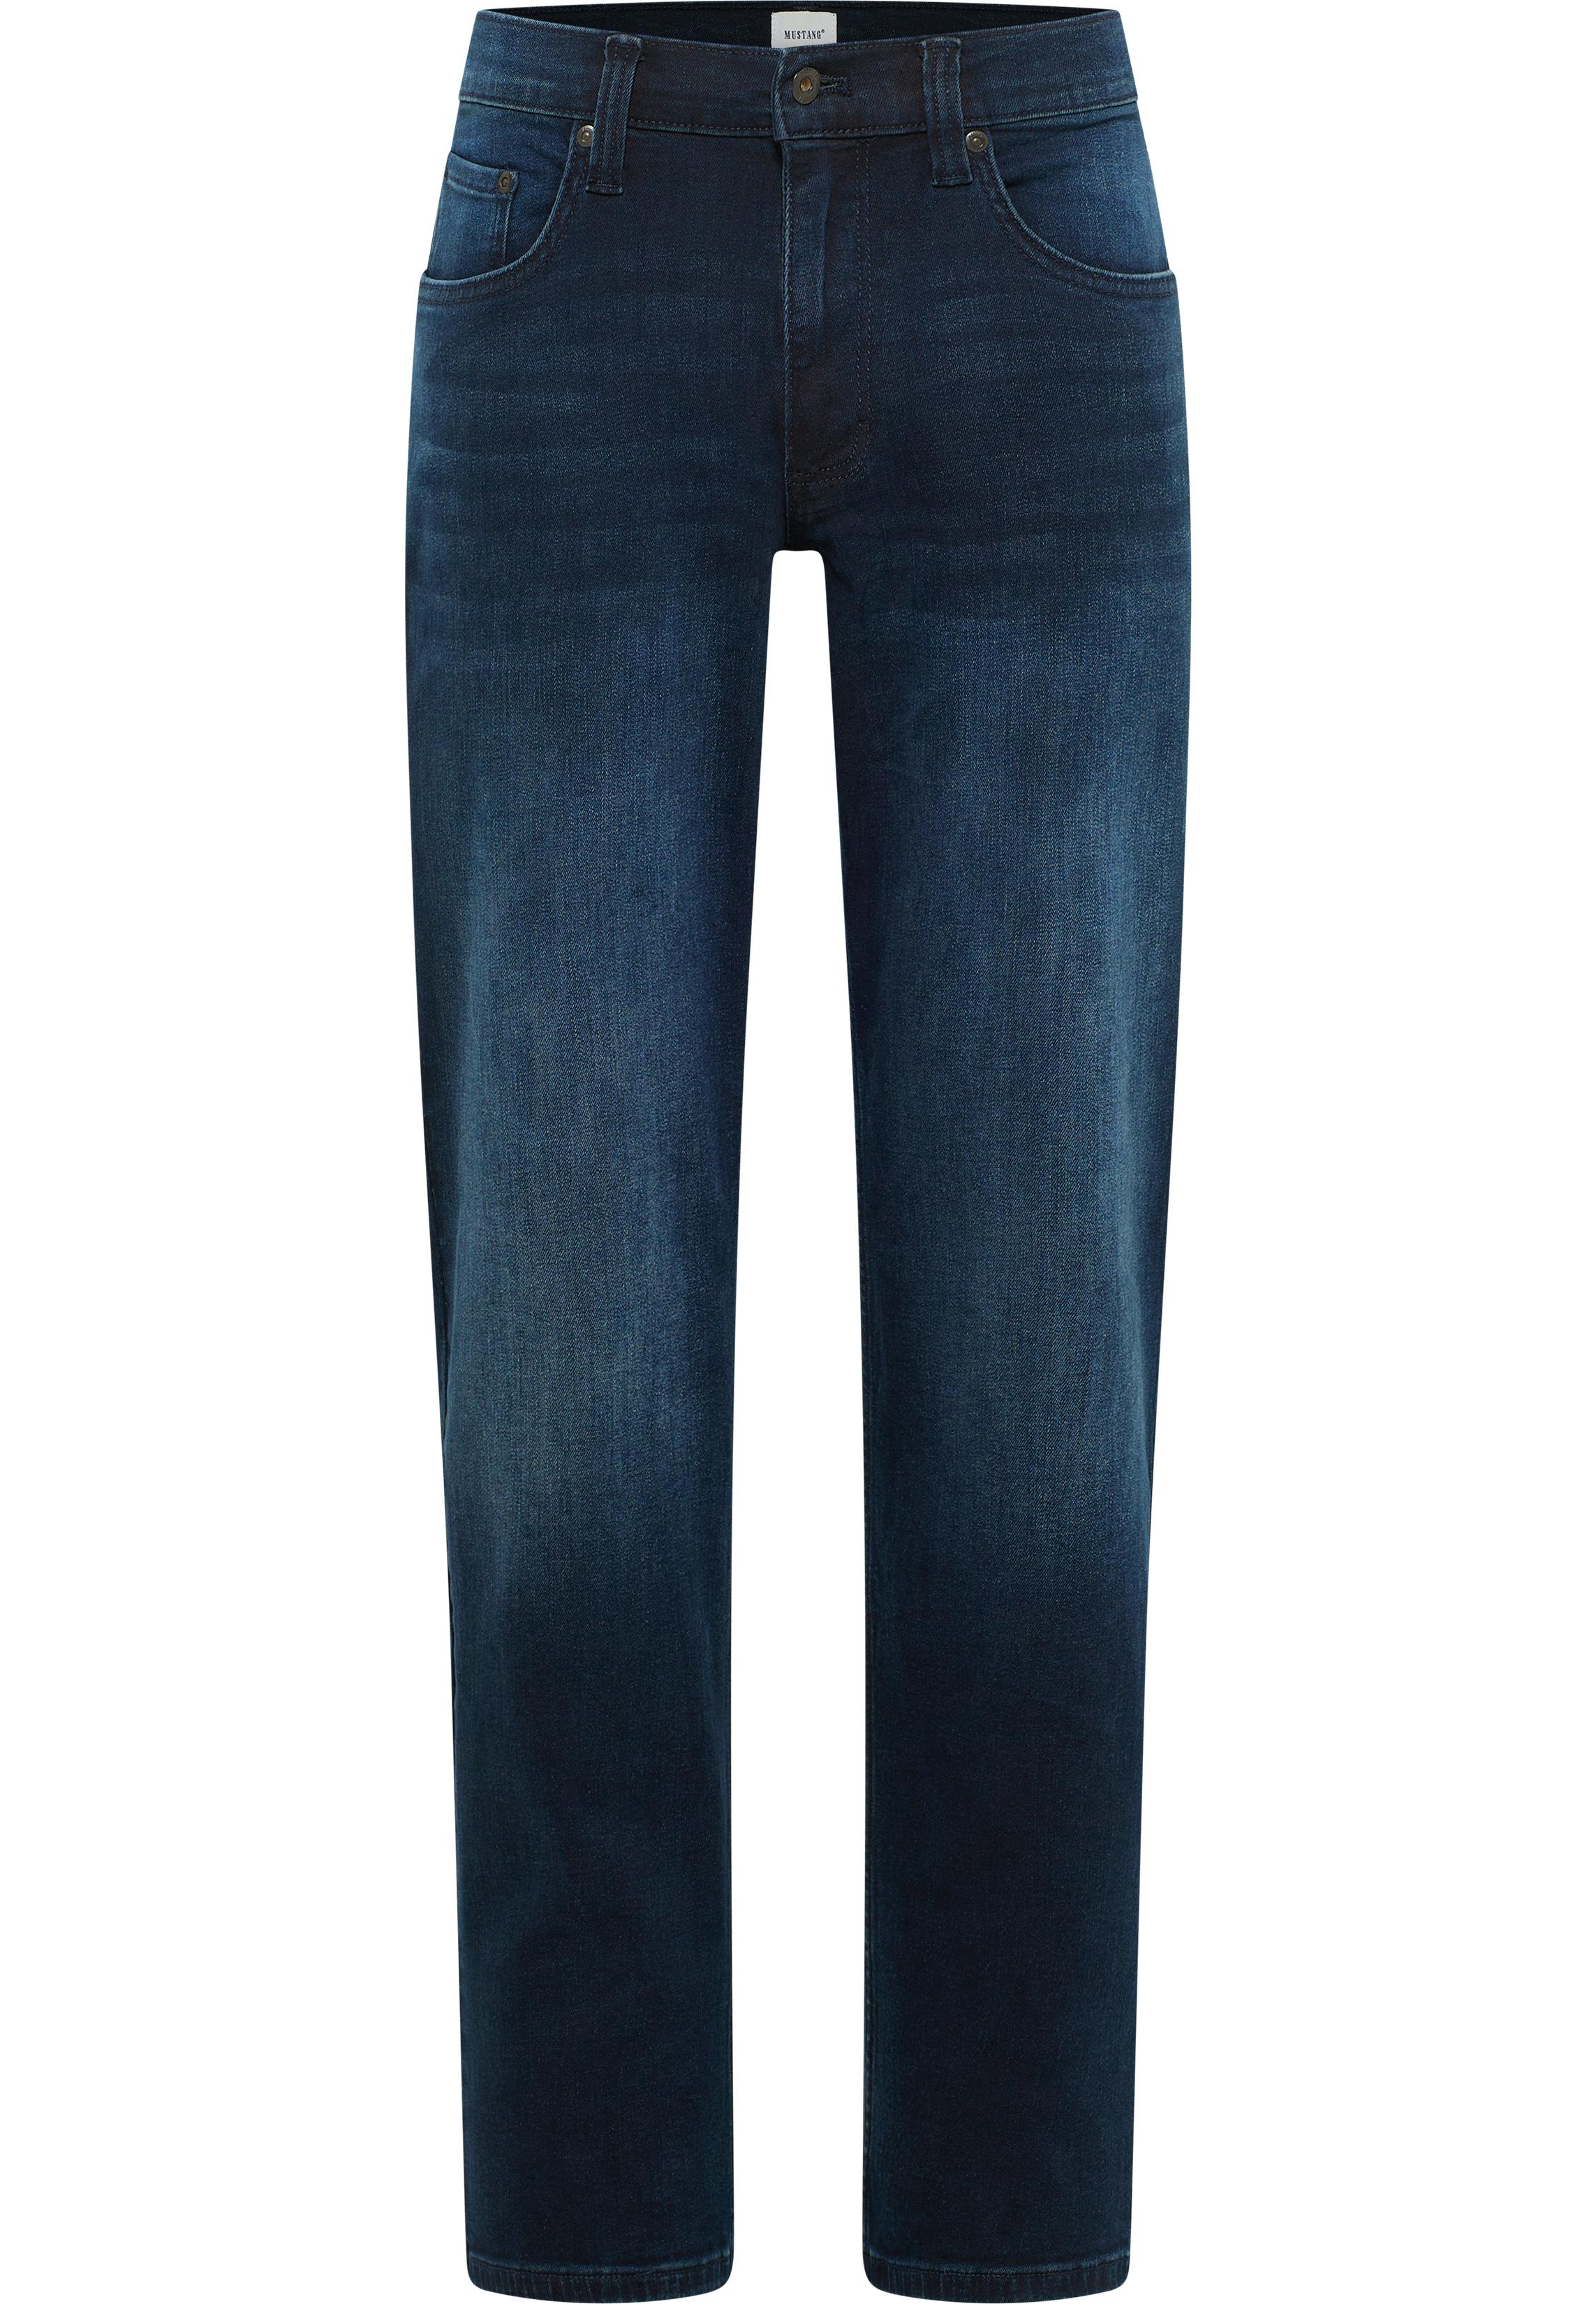 Image of Mustang Jeans Big Sur Straight deep blue used extra lang